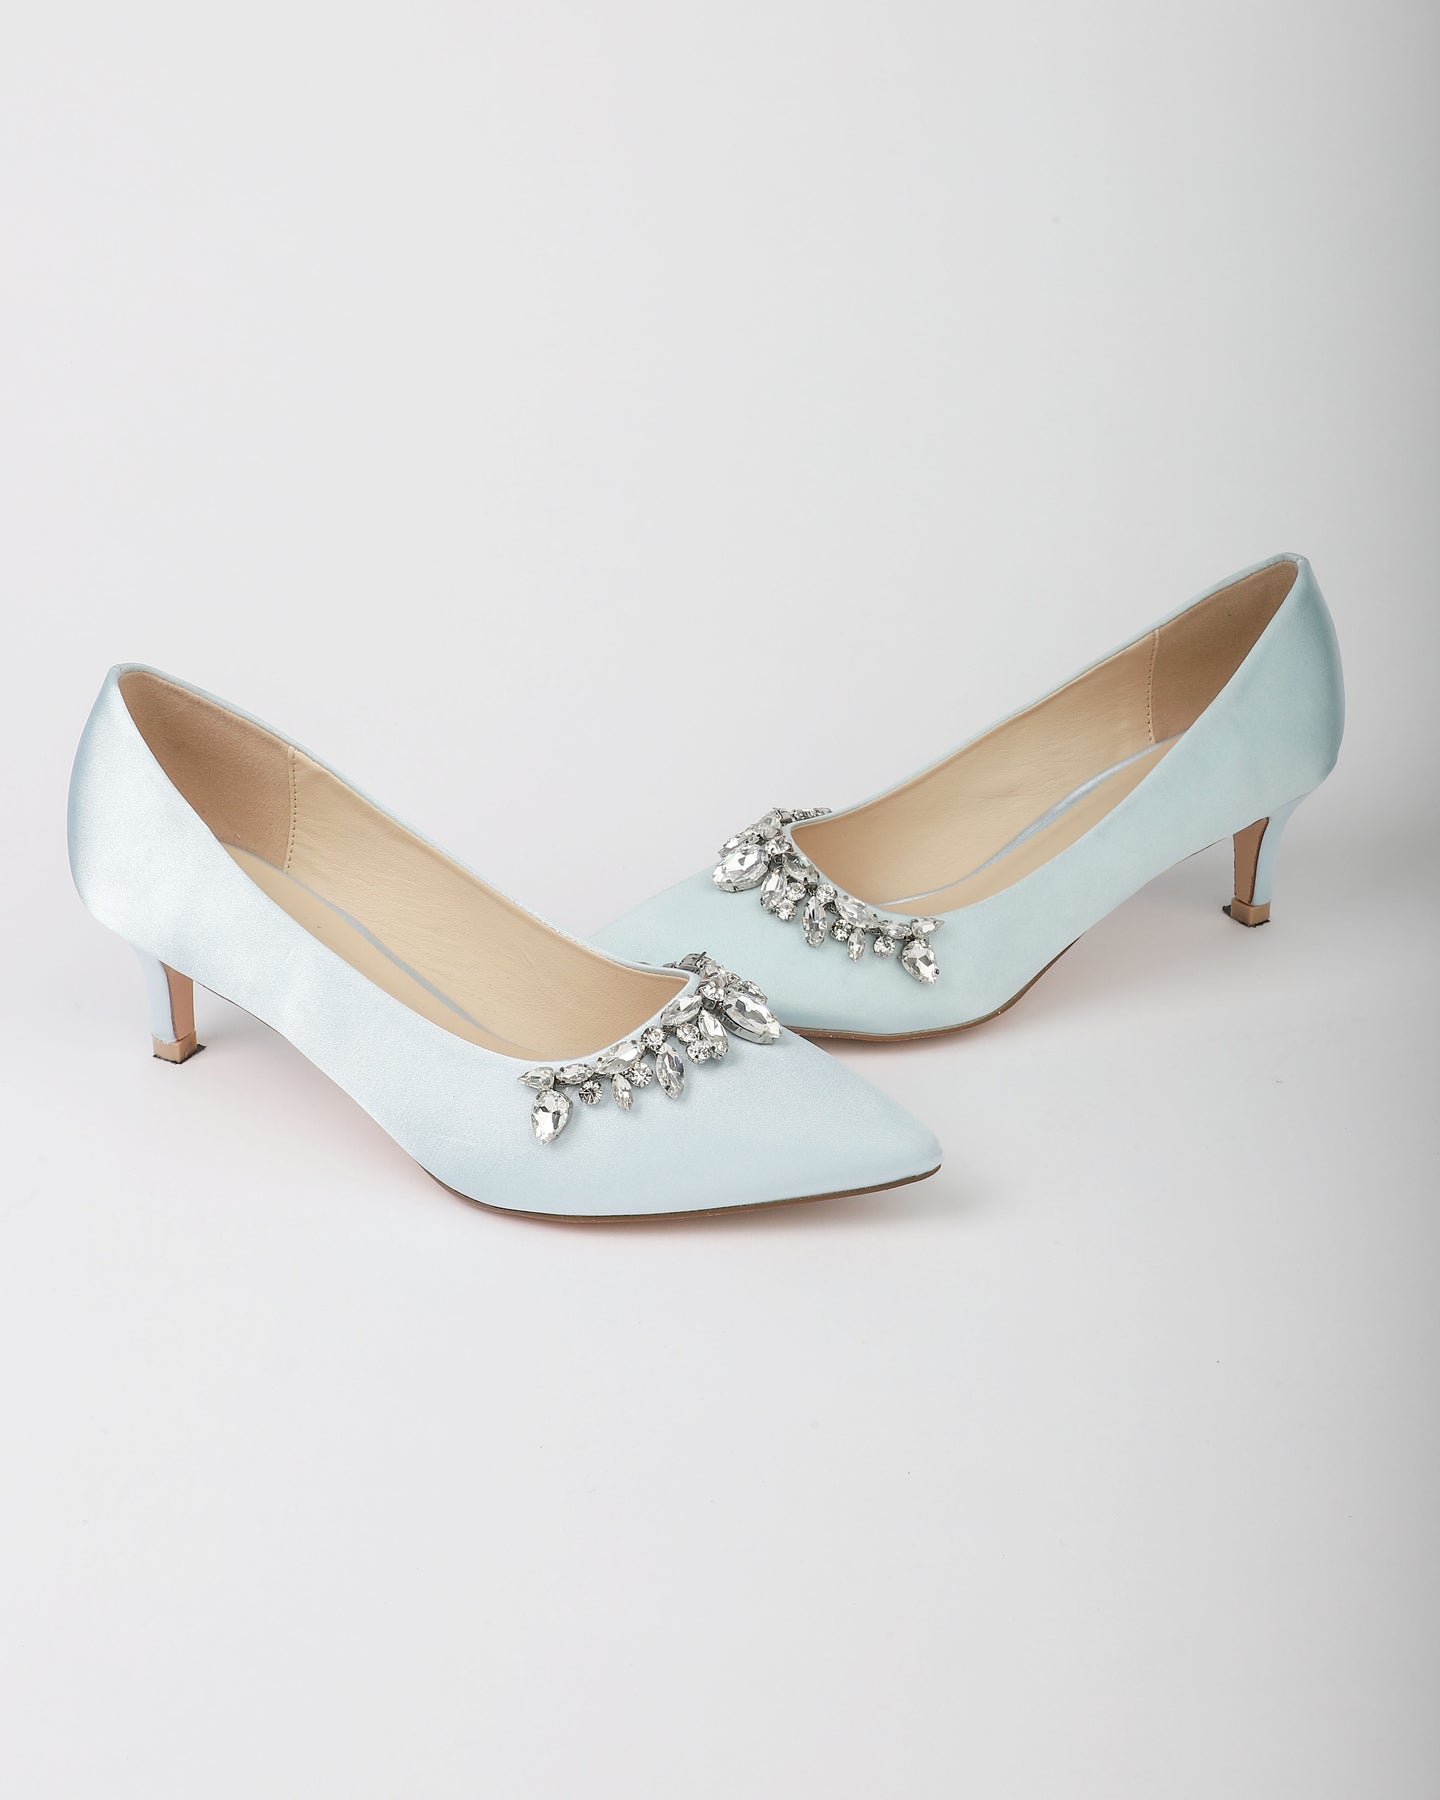 Blue bridal Shoes with low heel in blue satin for your wedding day